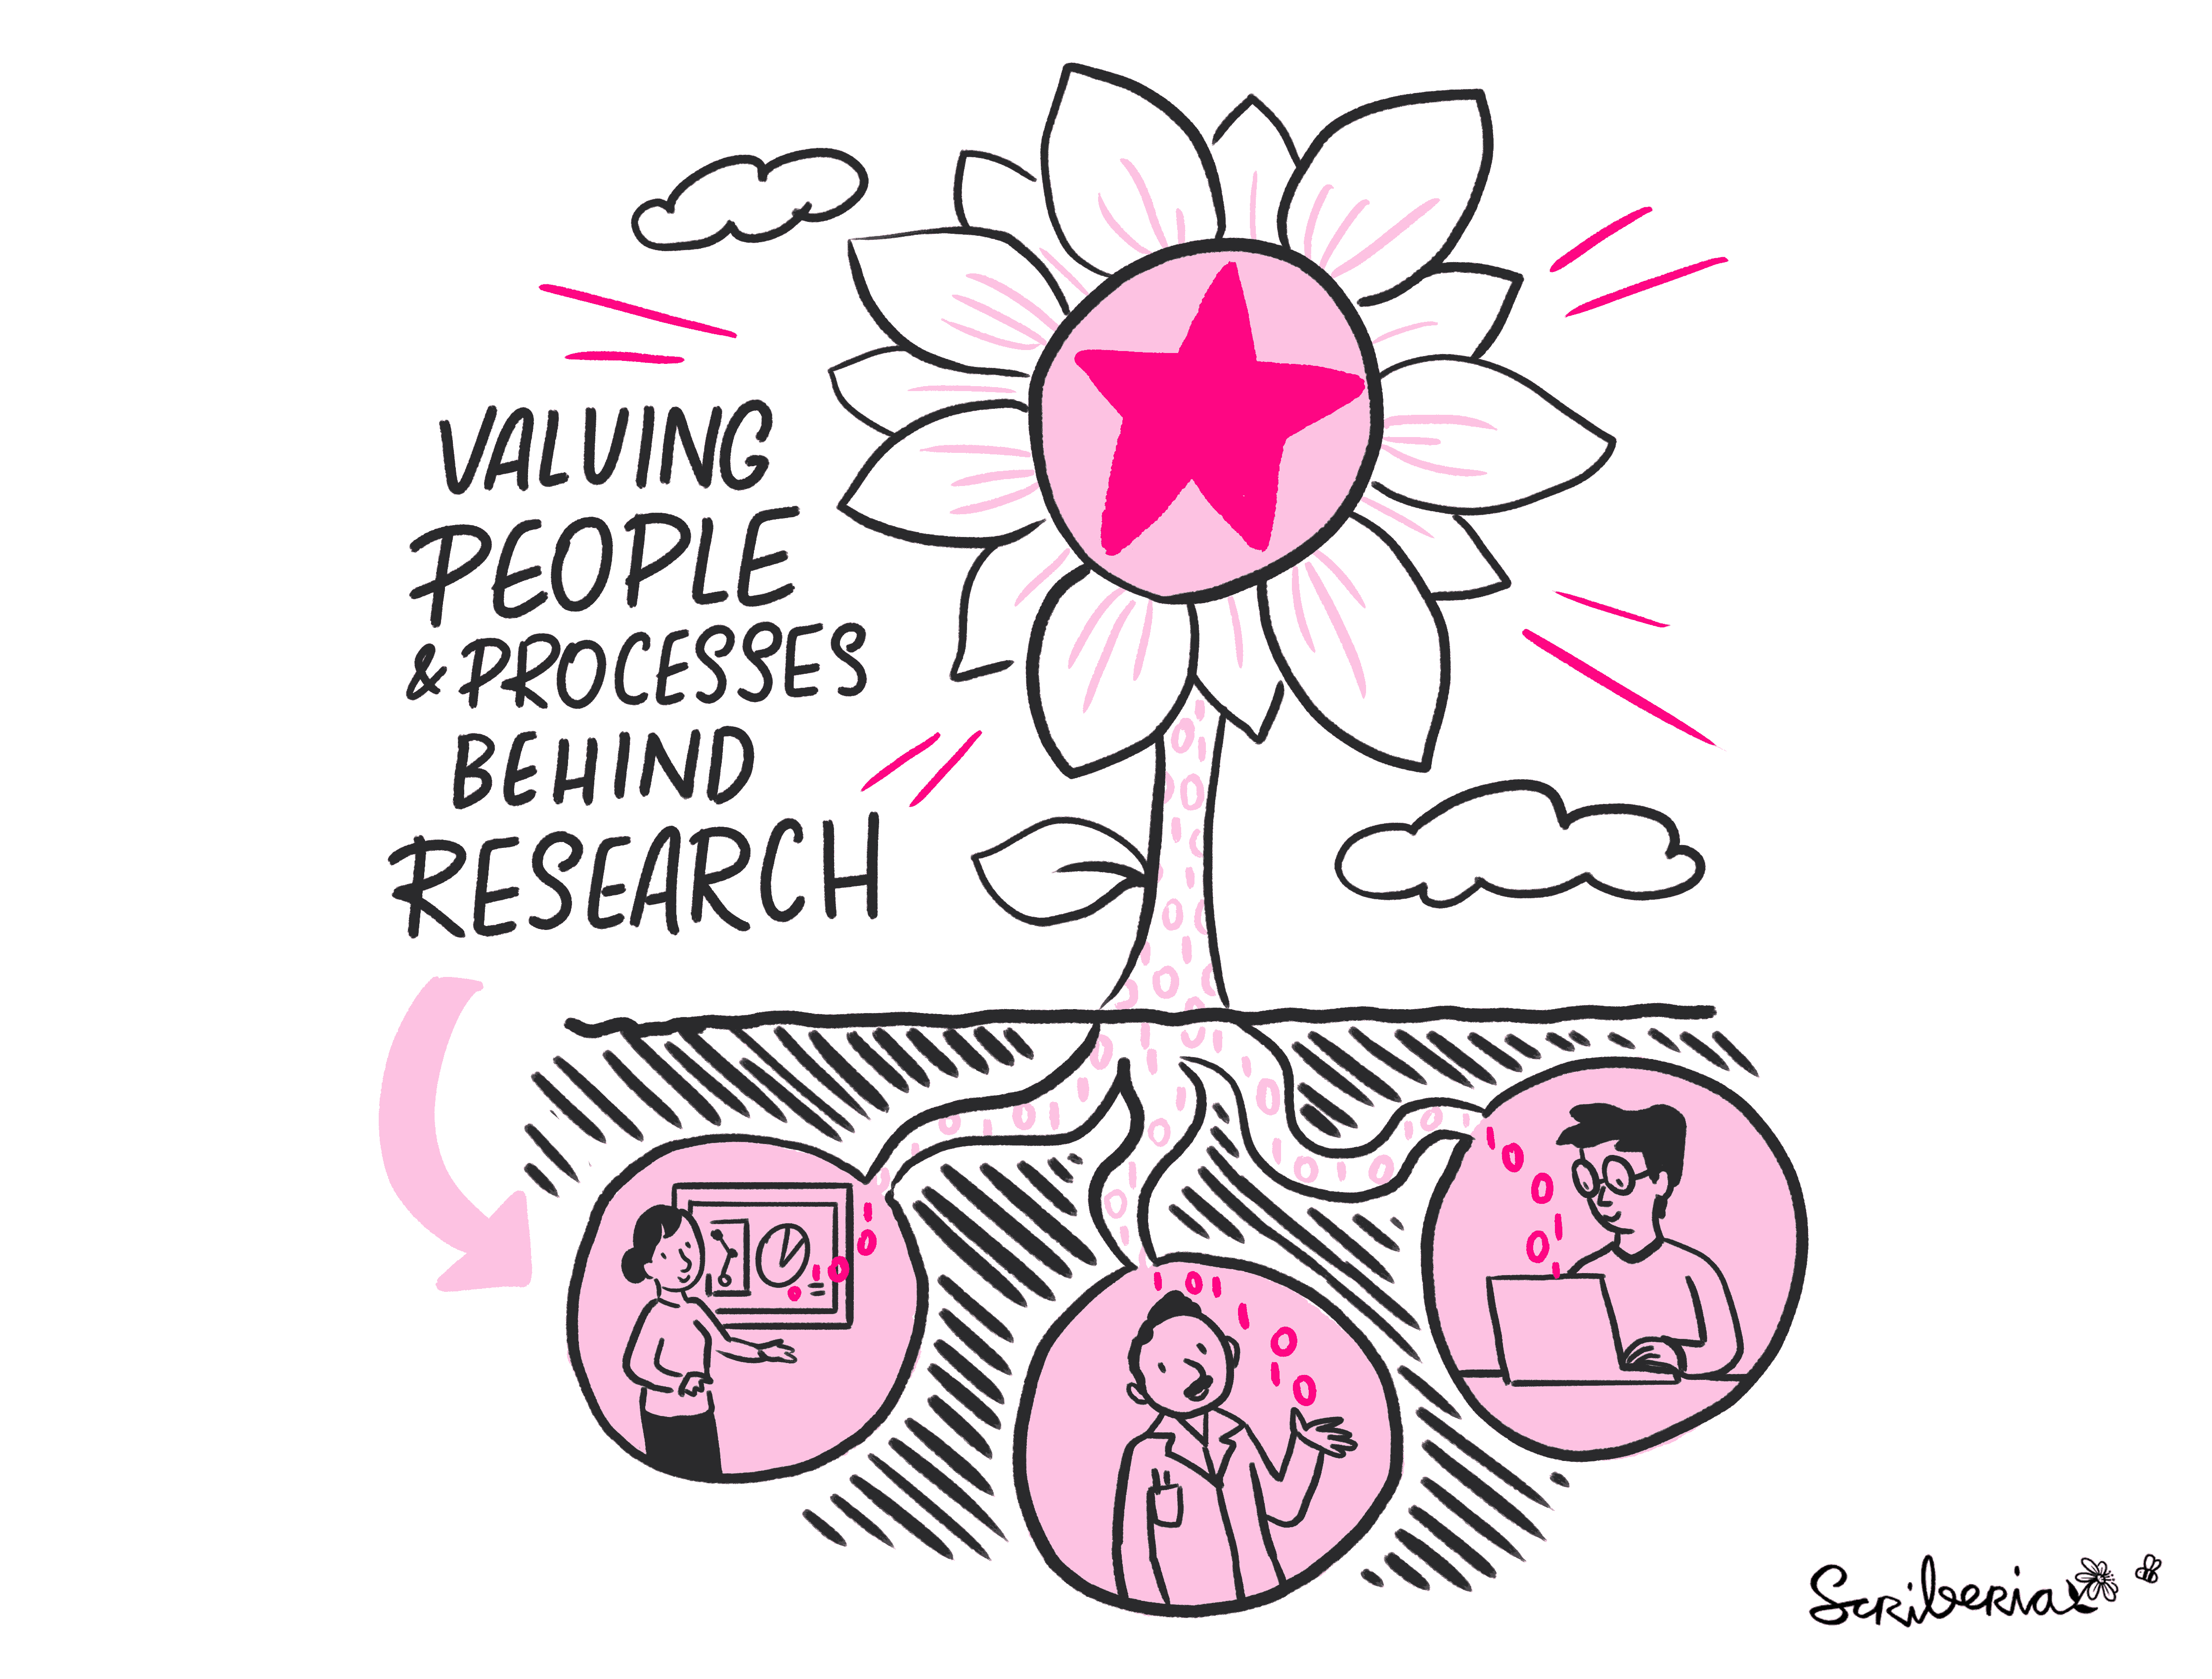 Cartoon-like sketch with pink colours of a large sunflower with a star in the middle sitting on top of the ground. It has the text next to the flower that says 'valuing people and processes behind research'. Below the ground, three roots extend, each terminating with an illustrated figure symbolising the often hidden efforts in research. From left to right, a female presenter giving a talk, a mustached male figure in a lab coat collecting data, and a person with glasses diligently working on a laptop. These figures represent the unseen work integral to the research process.